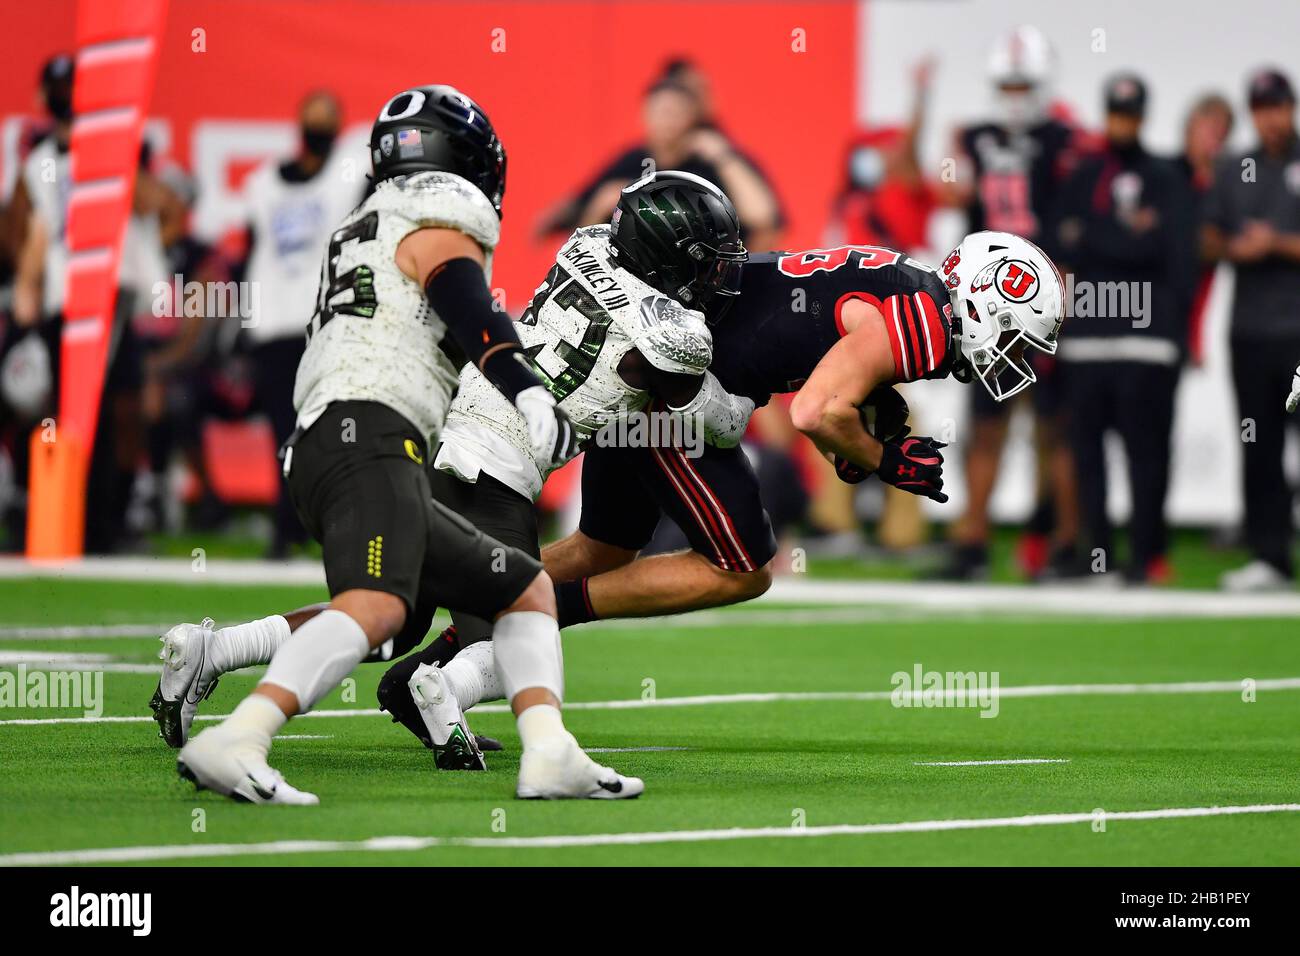 Duck Football High Resolution Stock Photography and Images - Alamy